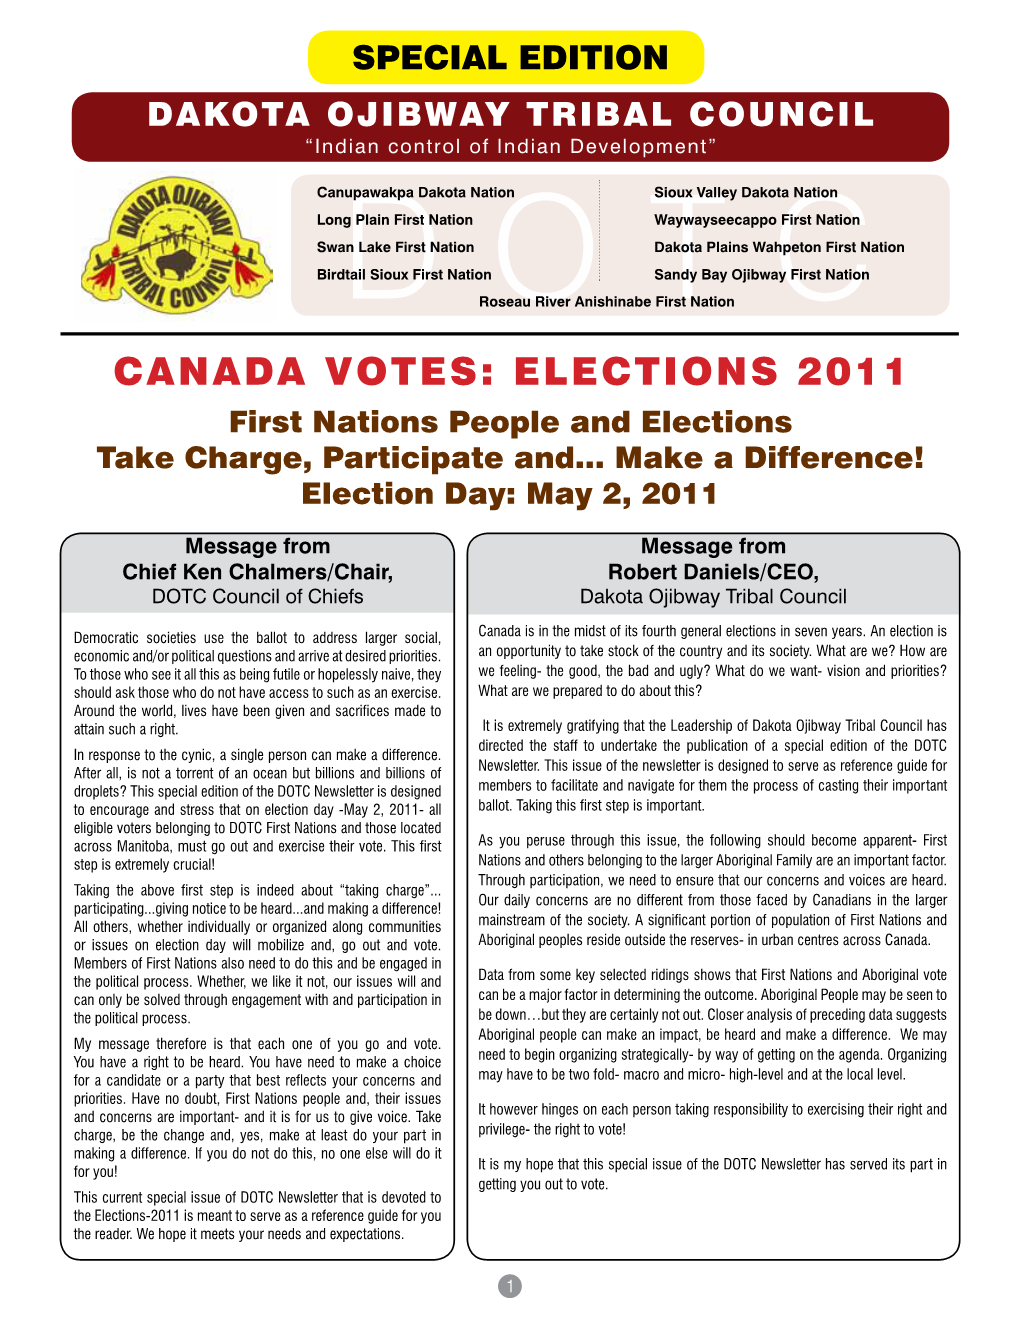 Canada Votes: Elections 2011 Annual Report